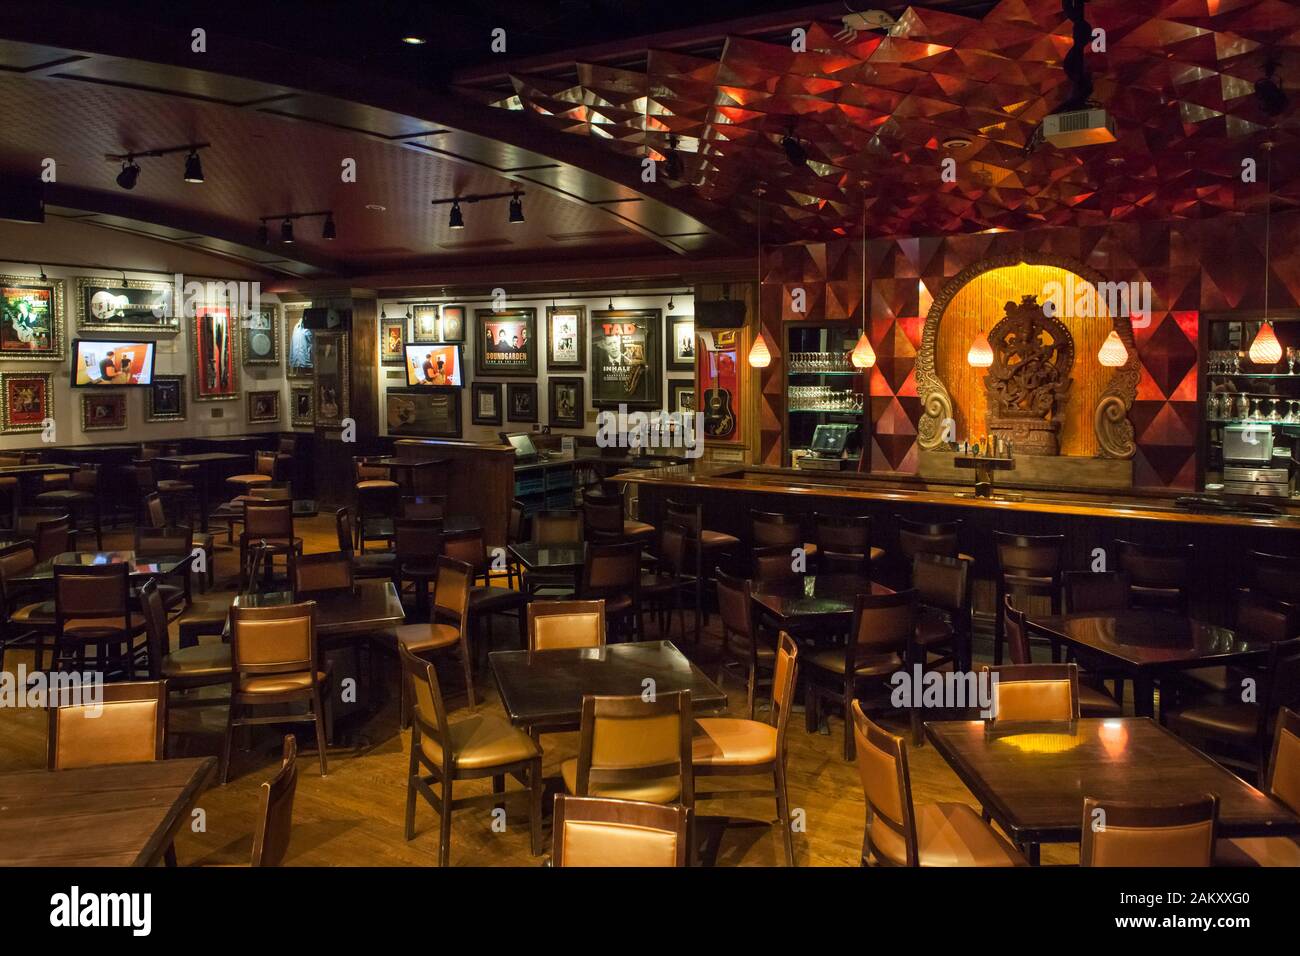 Hard Rock Cafe Atlanta High Resolution Stock Photography and Images - Alamy